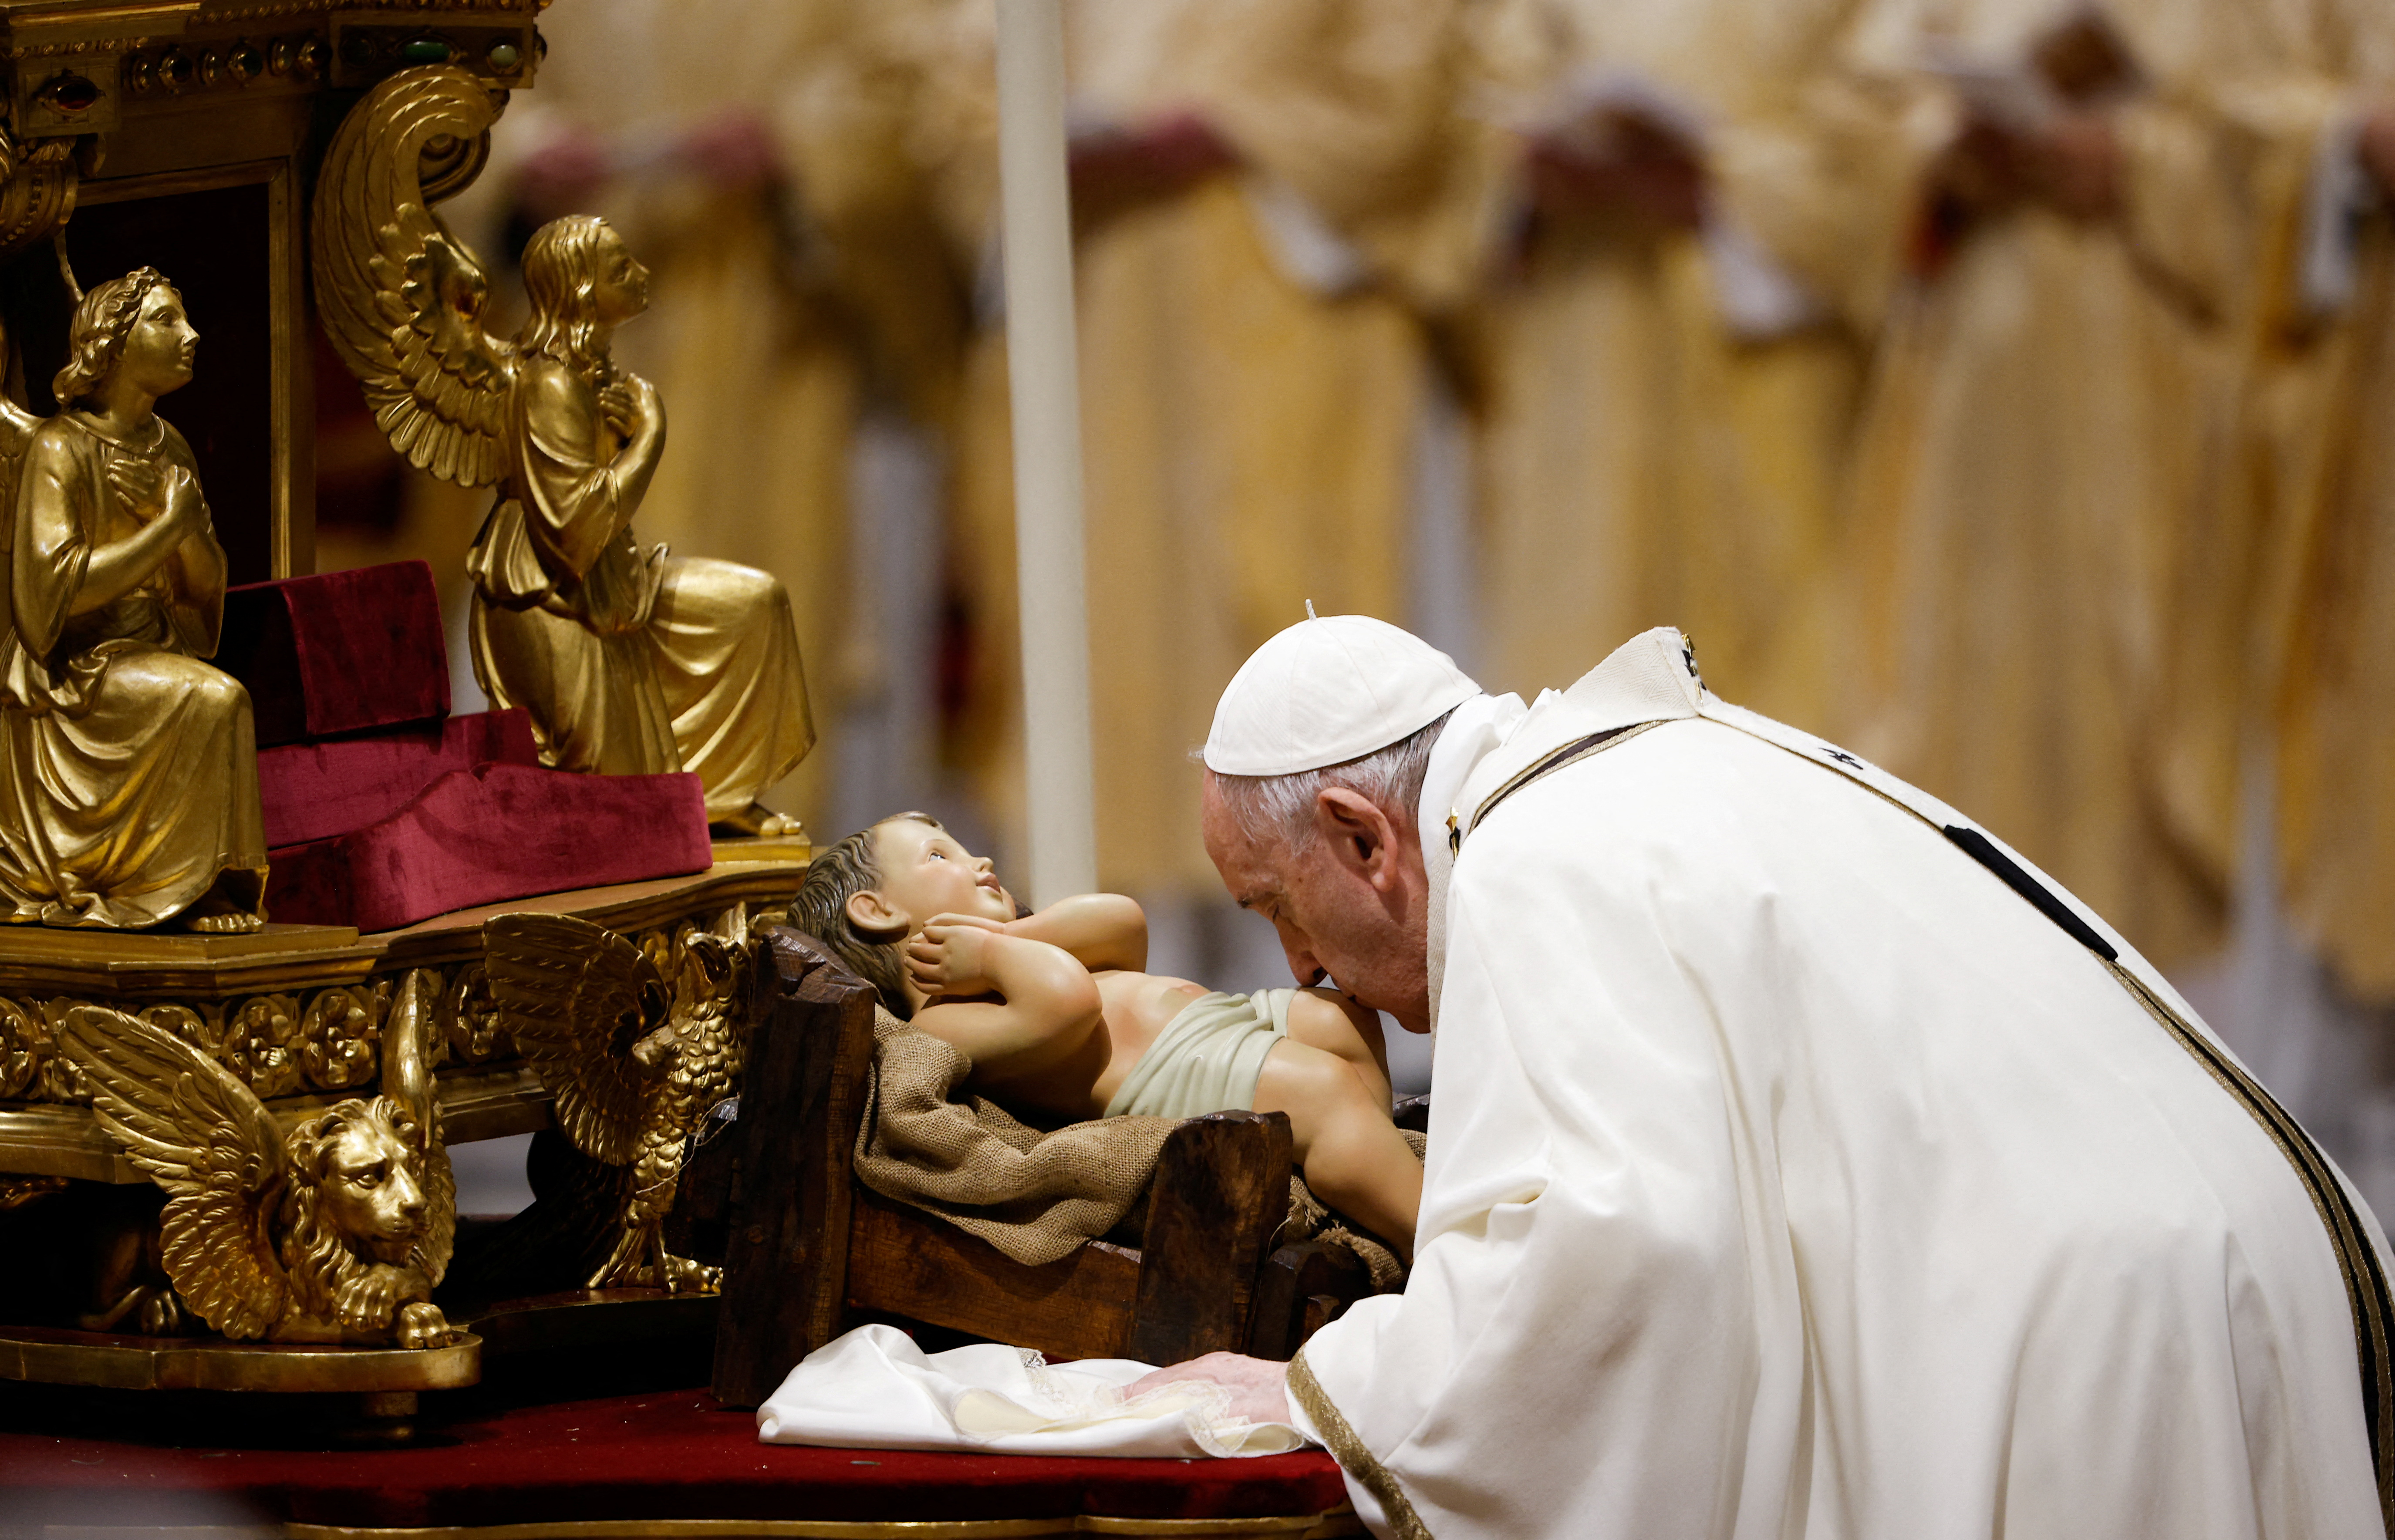 Pope Francis kisses a statue of baby Jesus as he celebrates Christmas Eve Holy Mass in St. Peter's Basilica at the Vatican, December 24, 2021. REUTERS/Guglielmo Mangiapane